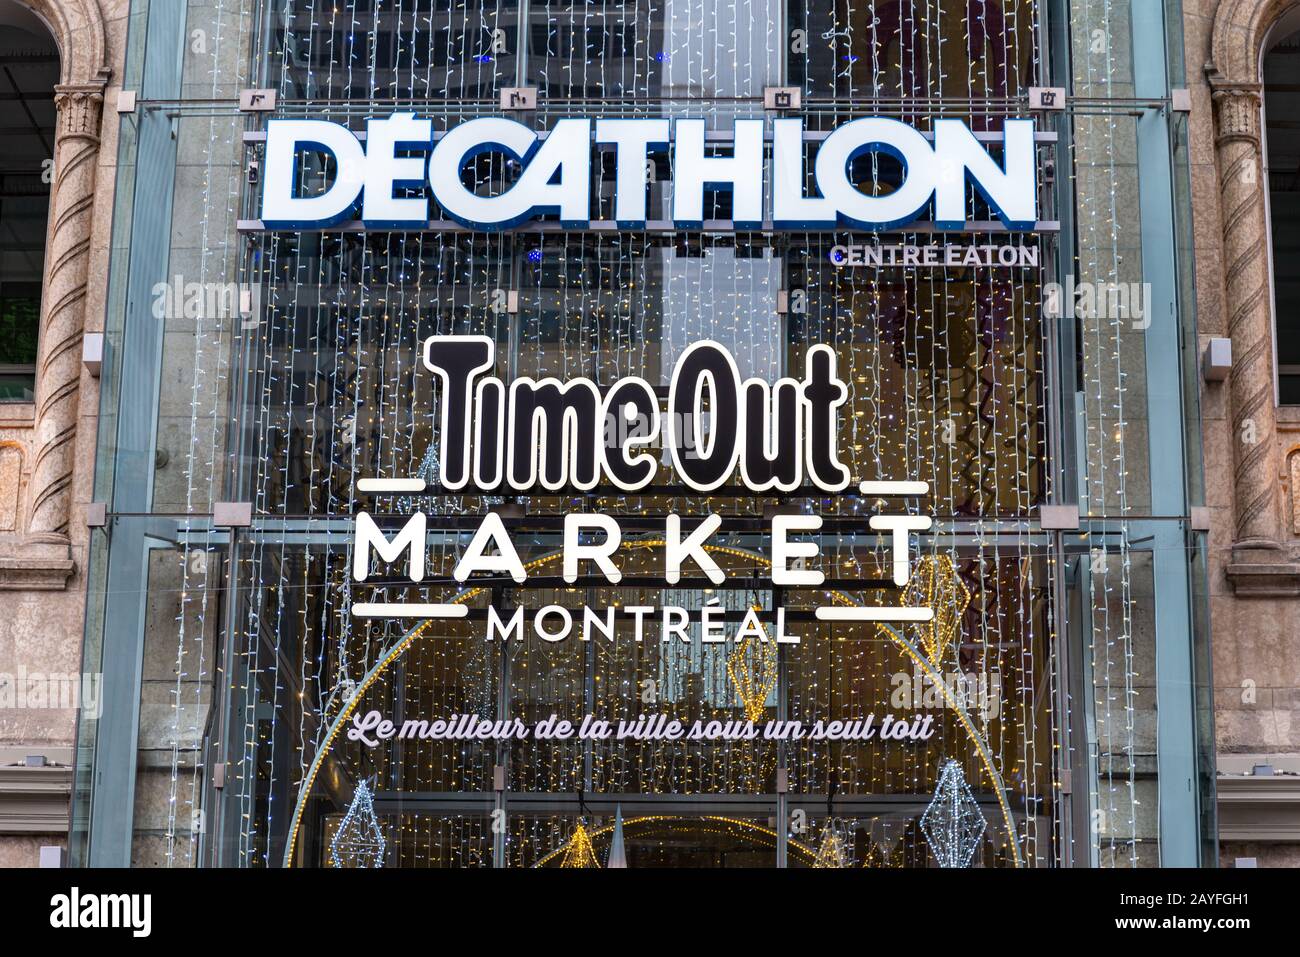 Montreal Quebec Canada December 29 2019: Timeout Market Montreal and  Decathlon sign Stock Photo - Alamy